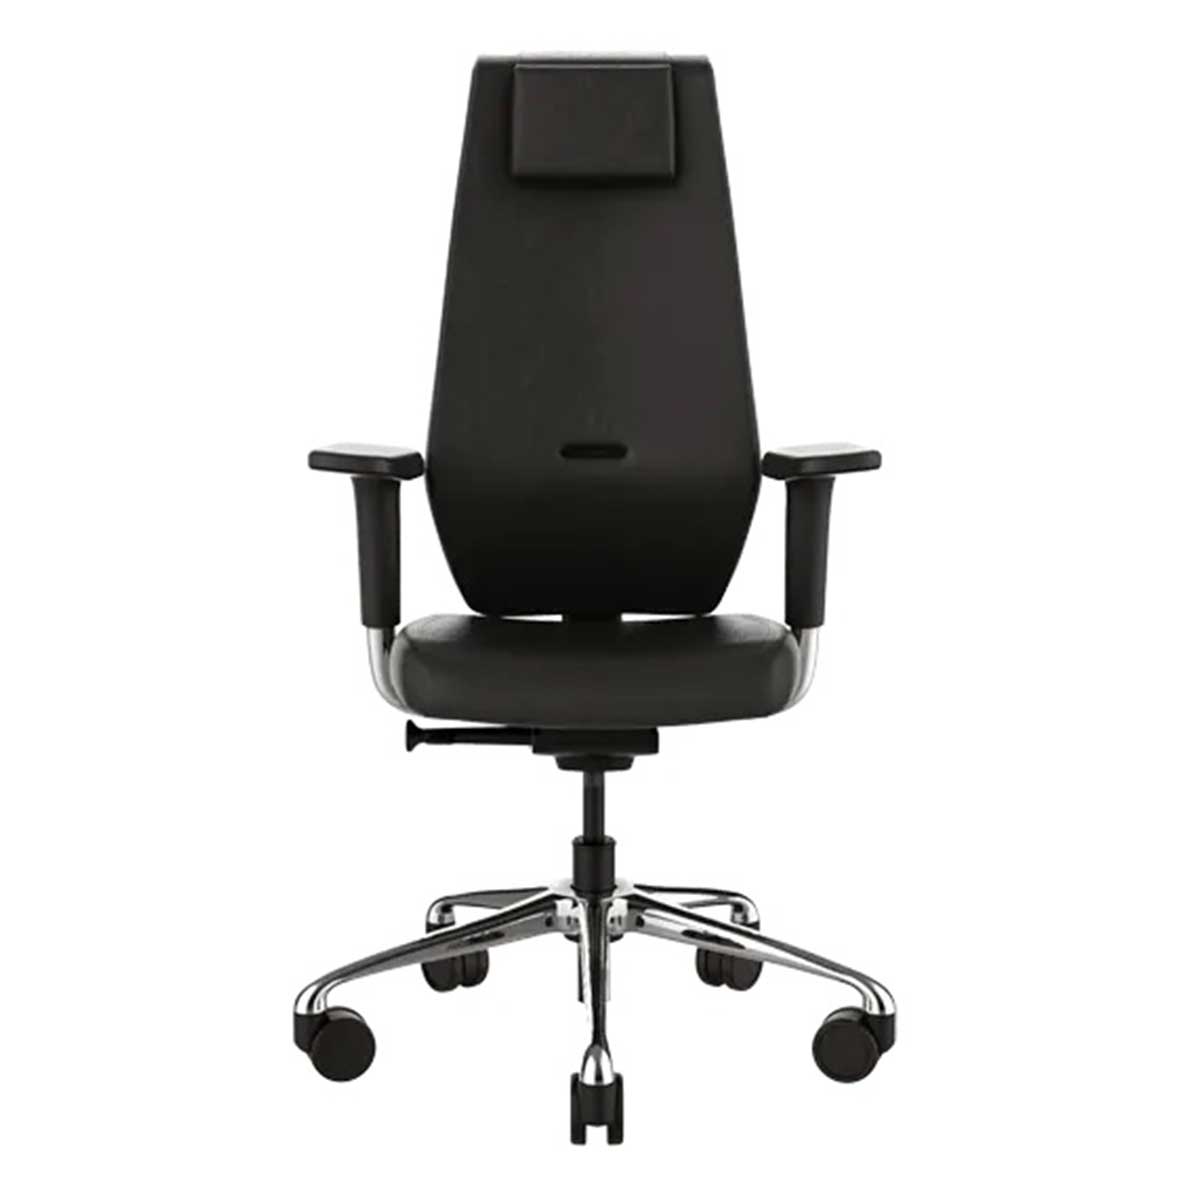 Mesh Executive Chair Manufacturers, Suppliers in Vishal Enclave